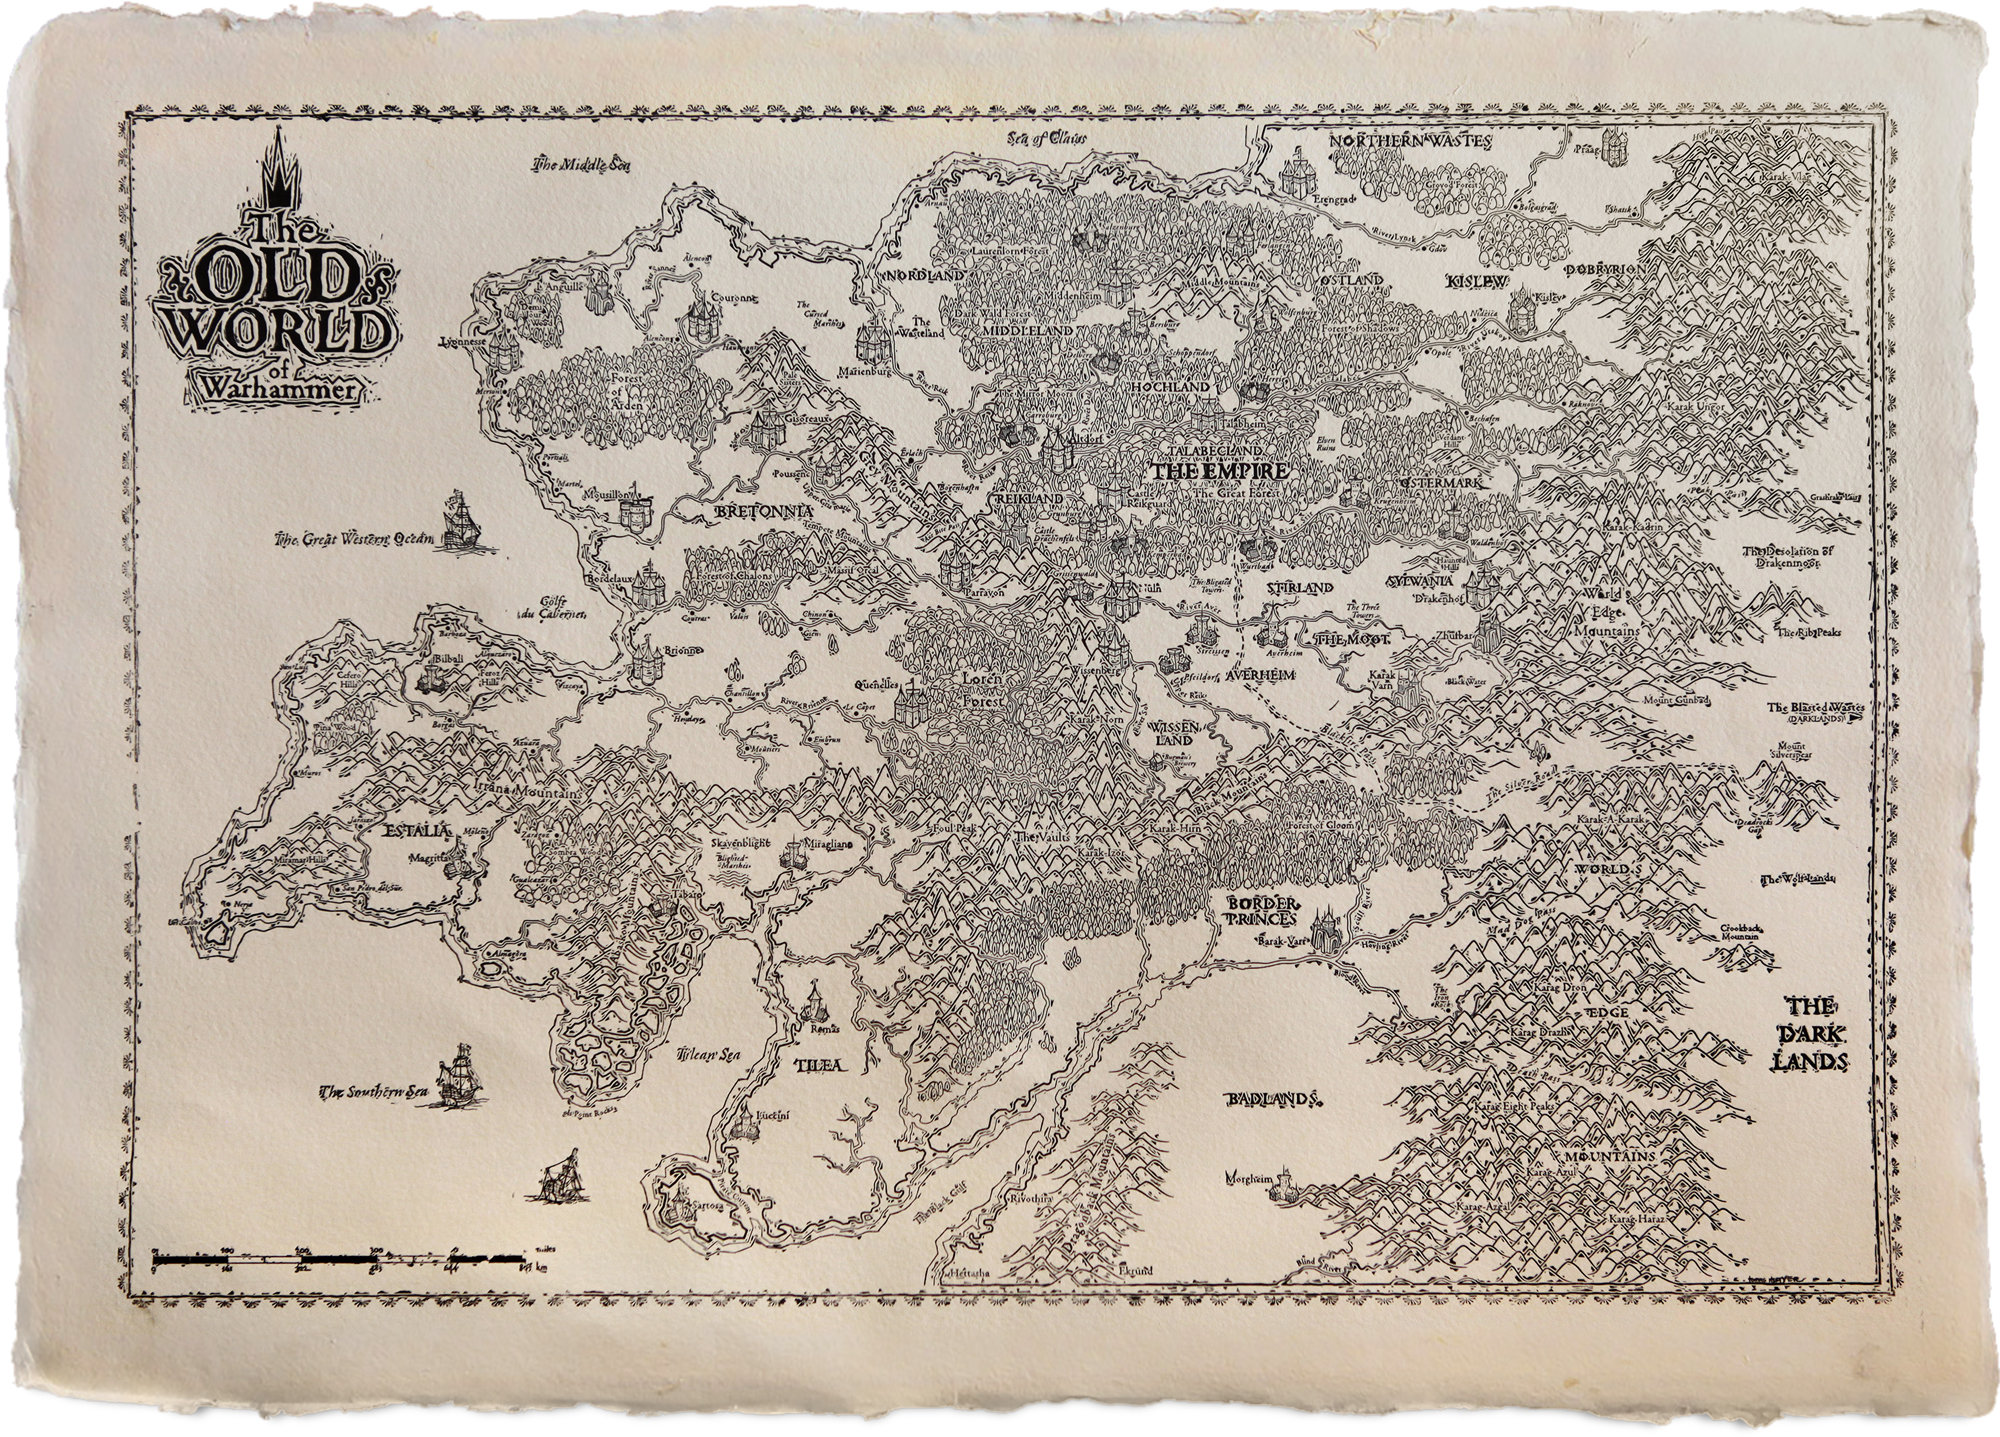 The Old World of Warhammer Illustrated Map Hand Printed on